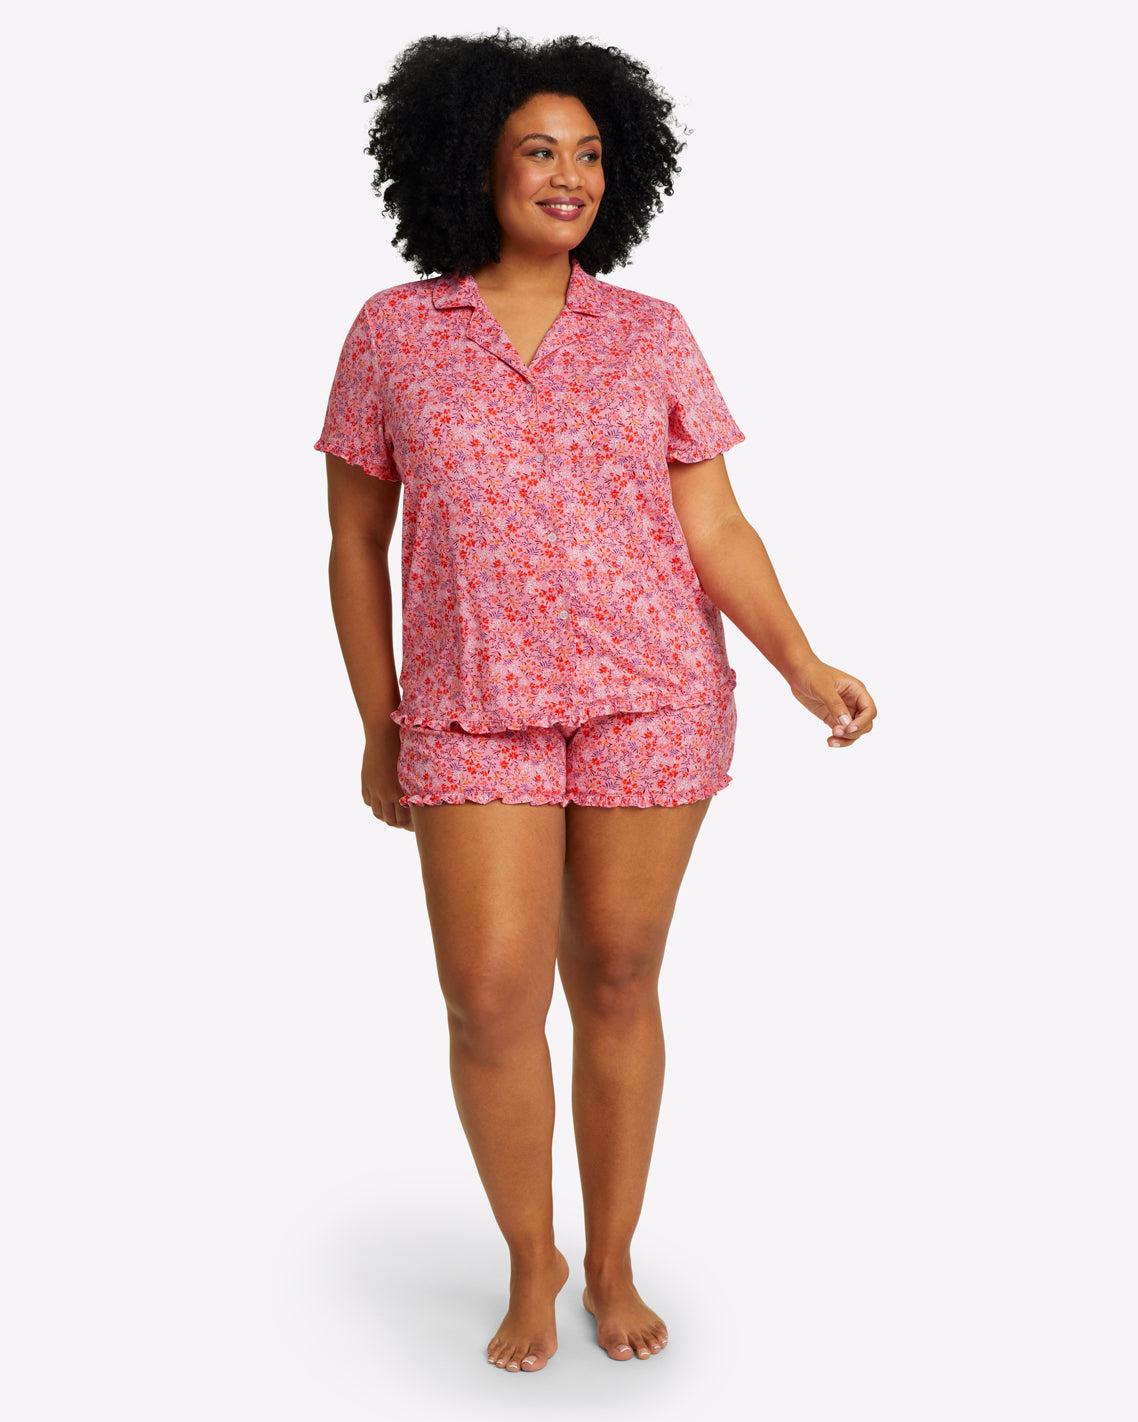 Mickey Pajama Set in Pansy Floral